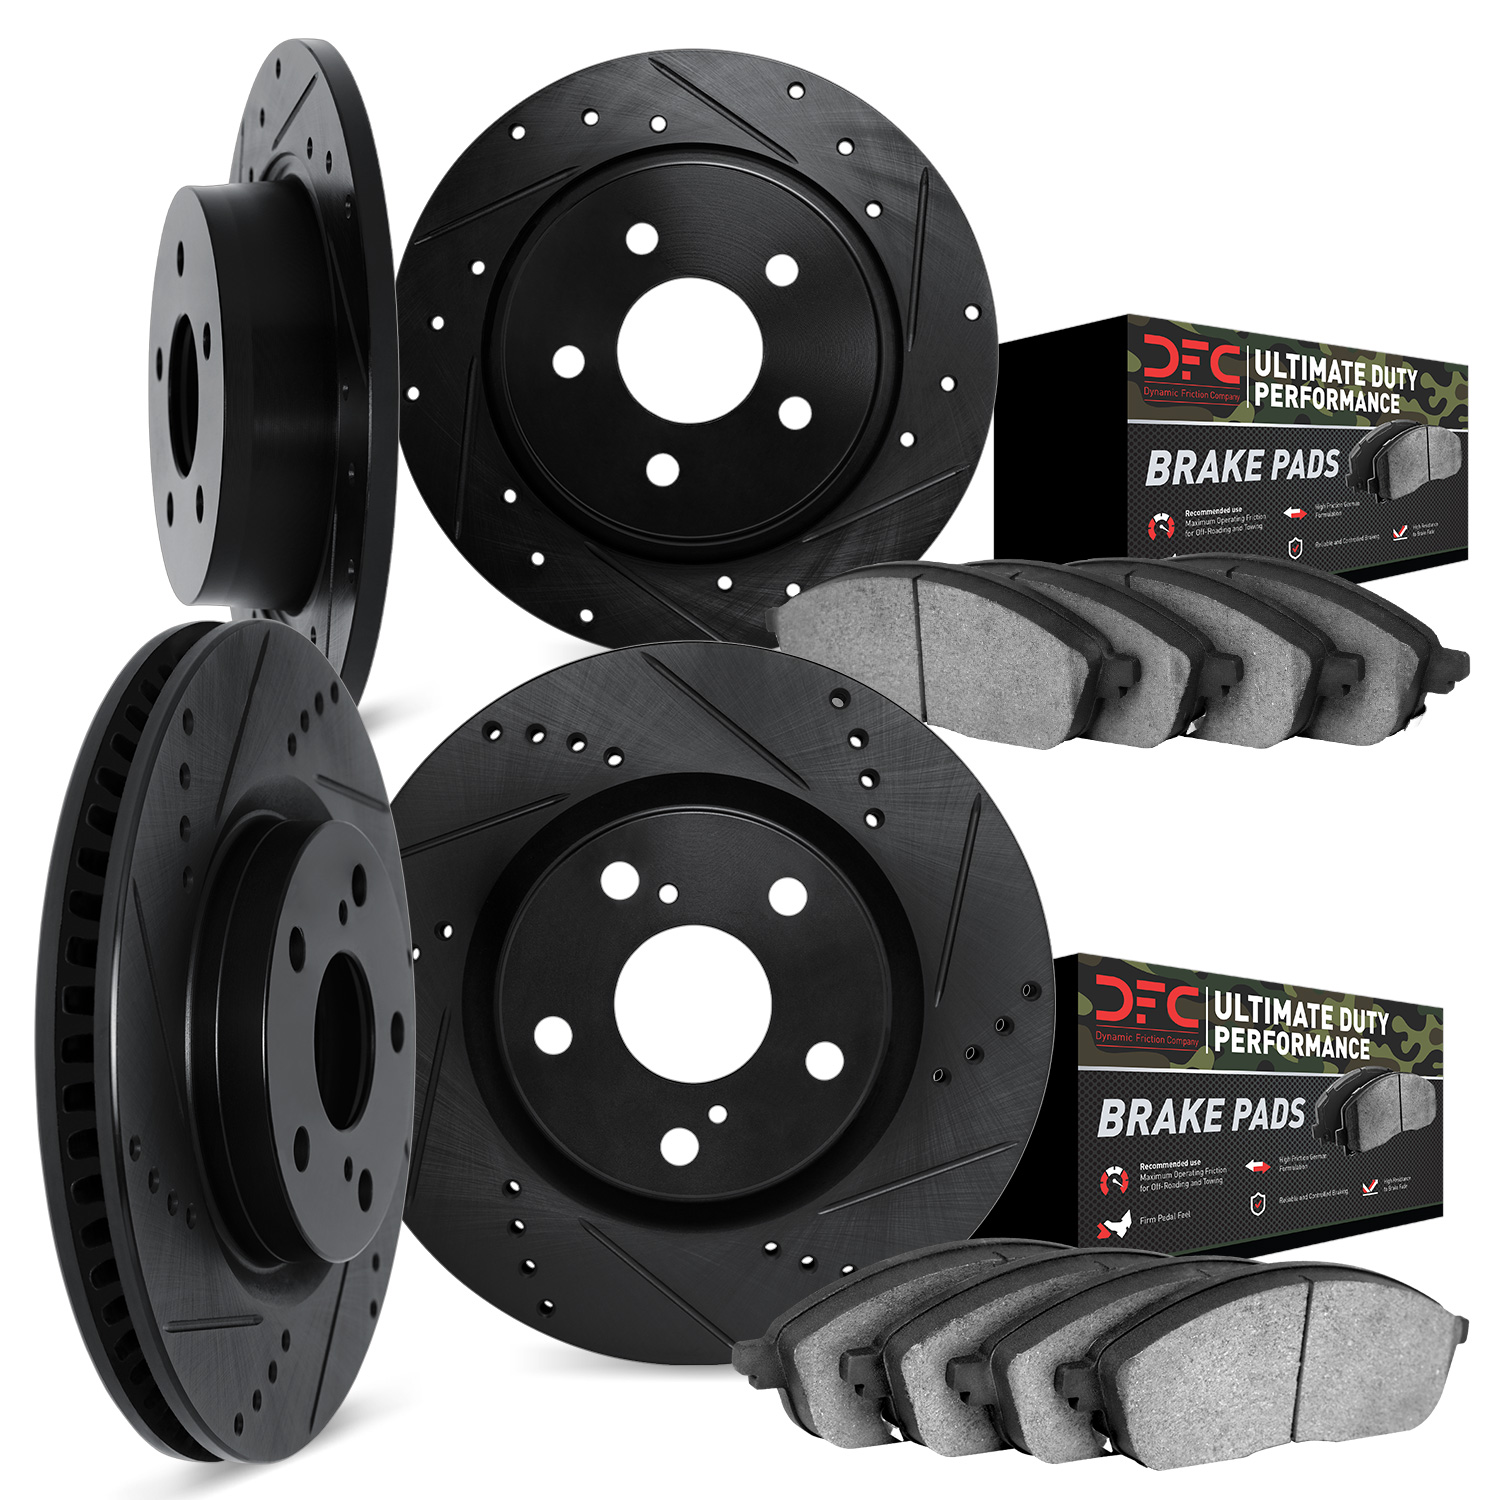 8404-54004 Drilled/Slotted Brake Rotors with Ultimate-Duty Brake Pads Kit [Black], 1998-1999 Ford/Lincoln/Mercury/Mazda, Positio